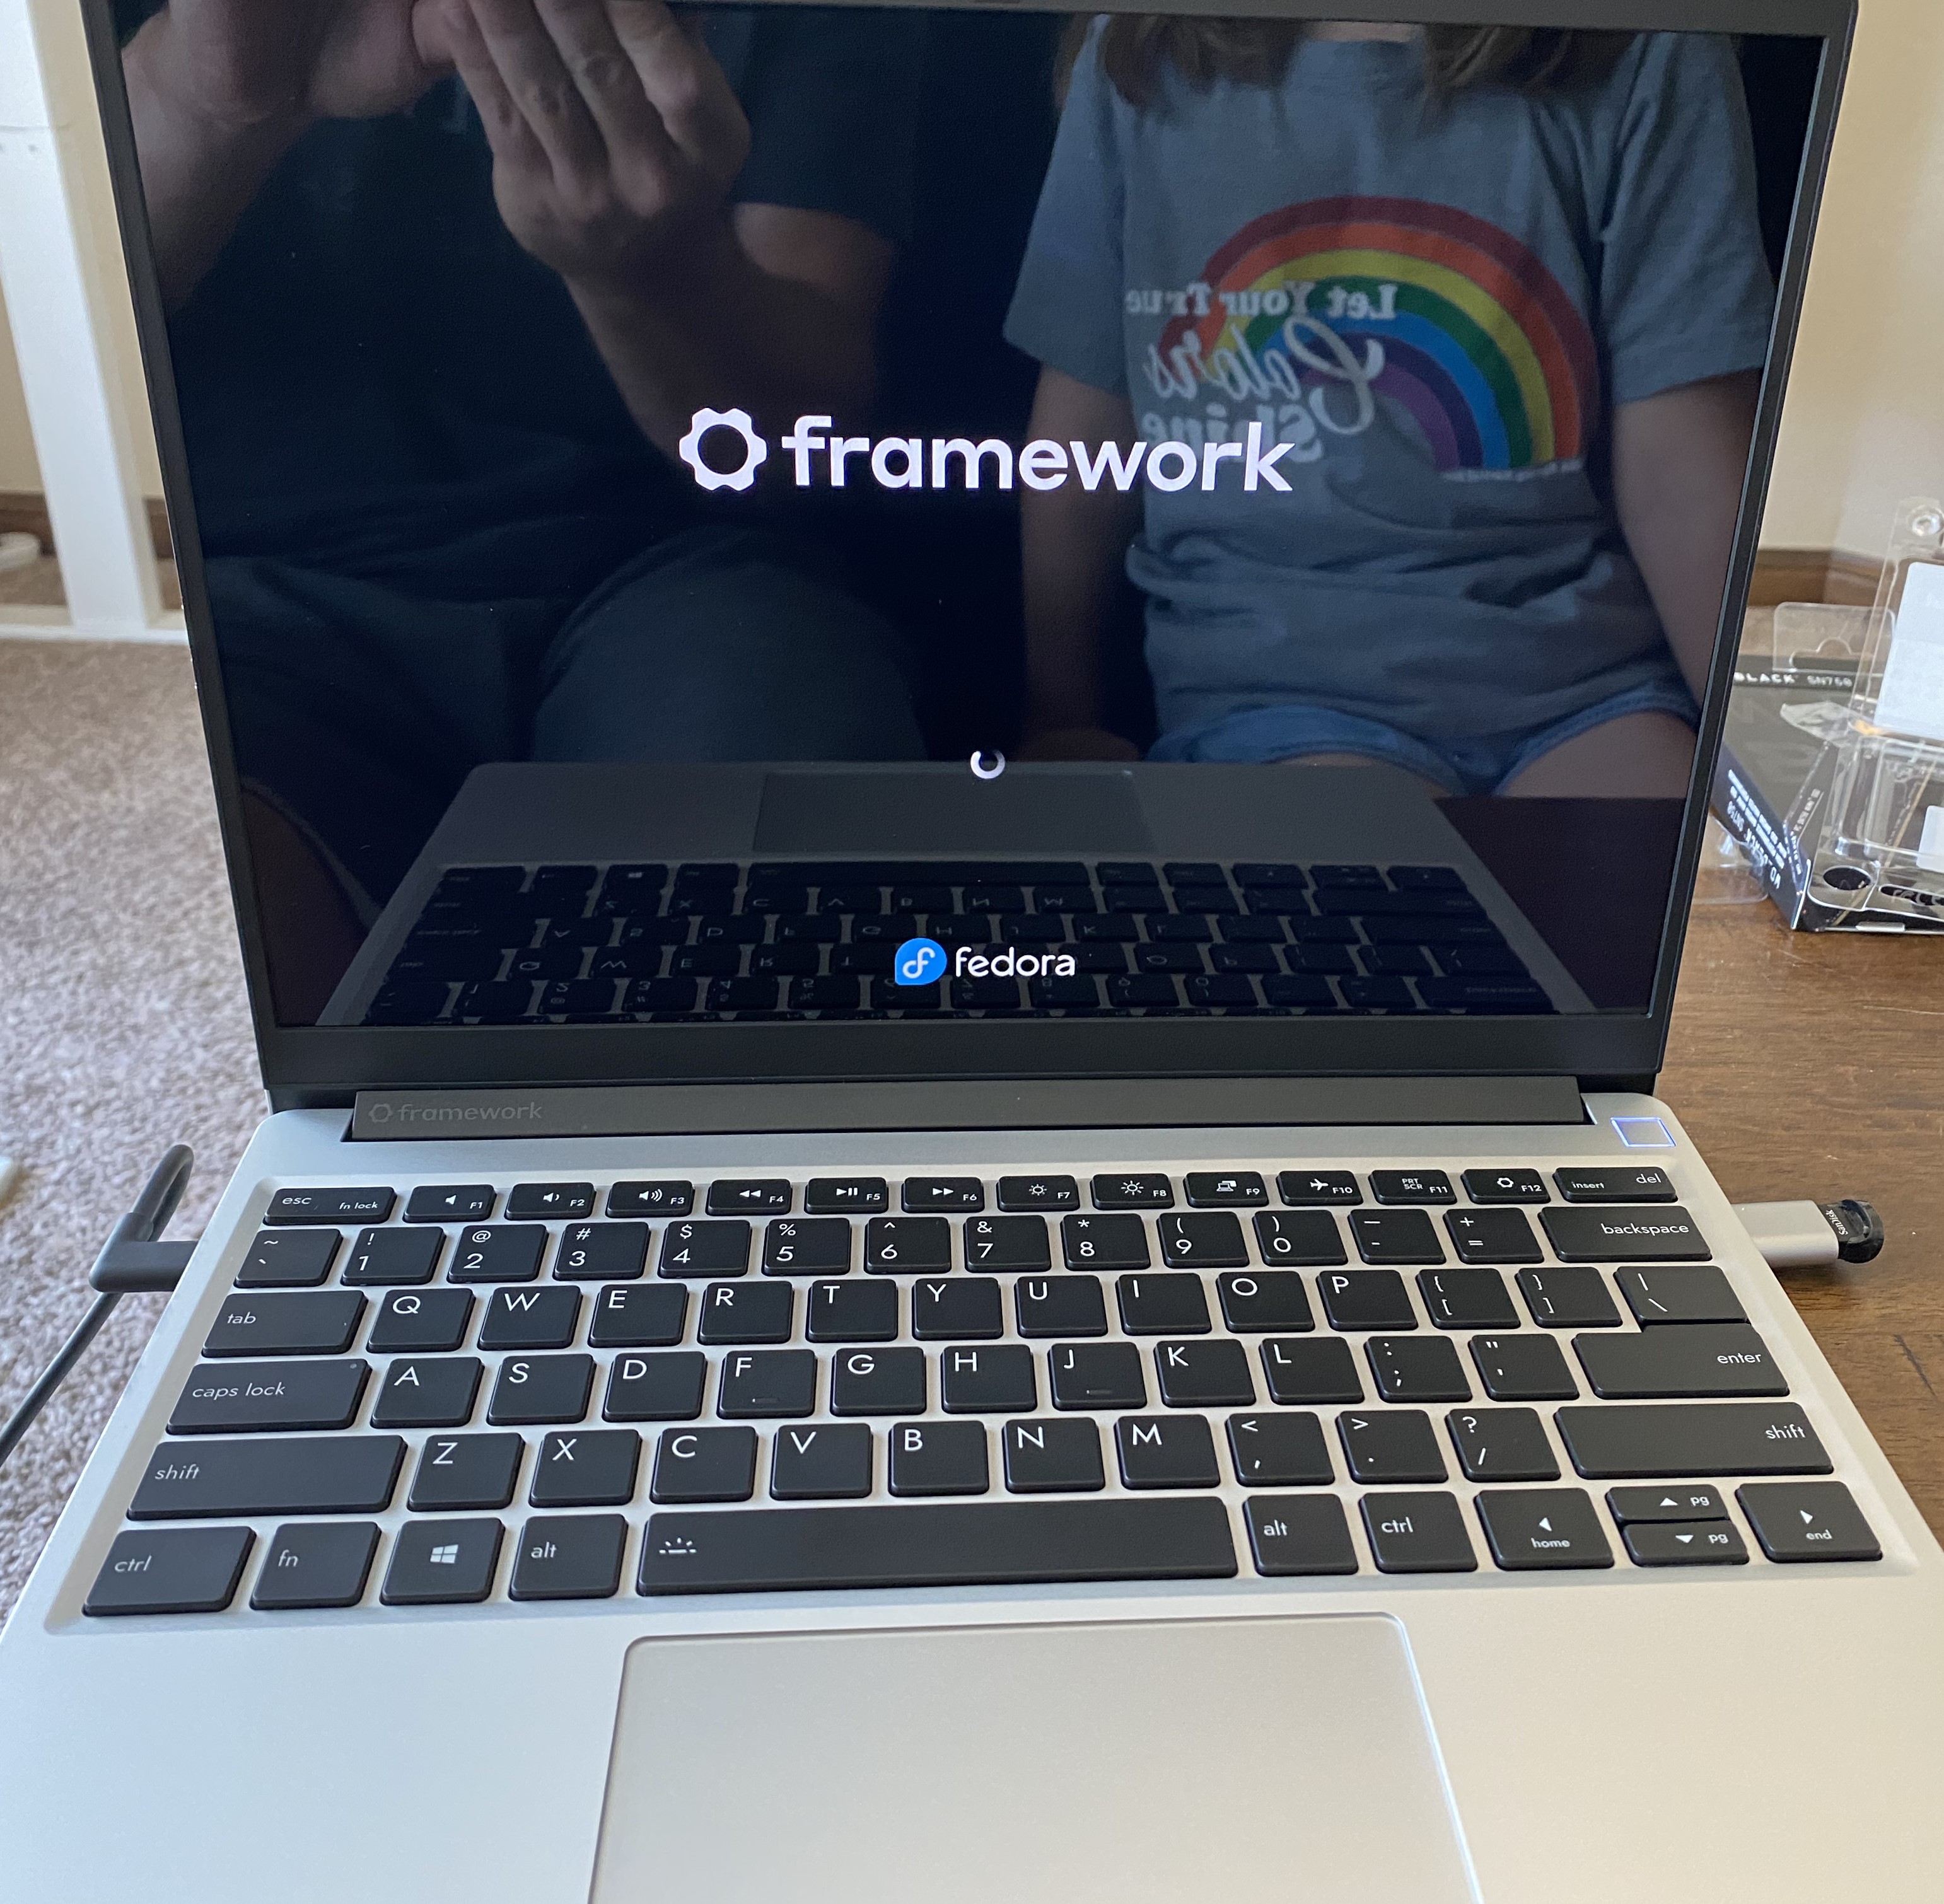 a photo of the framework boot screen